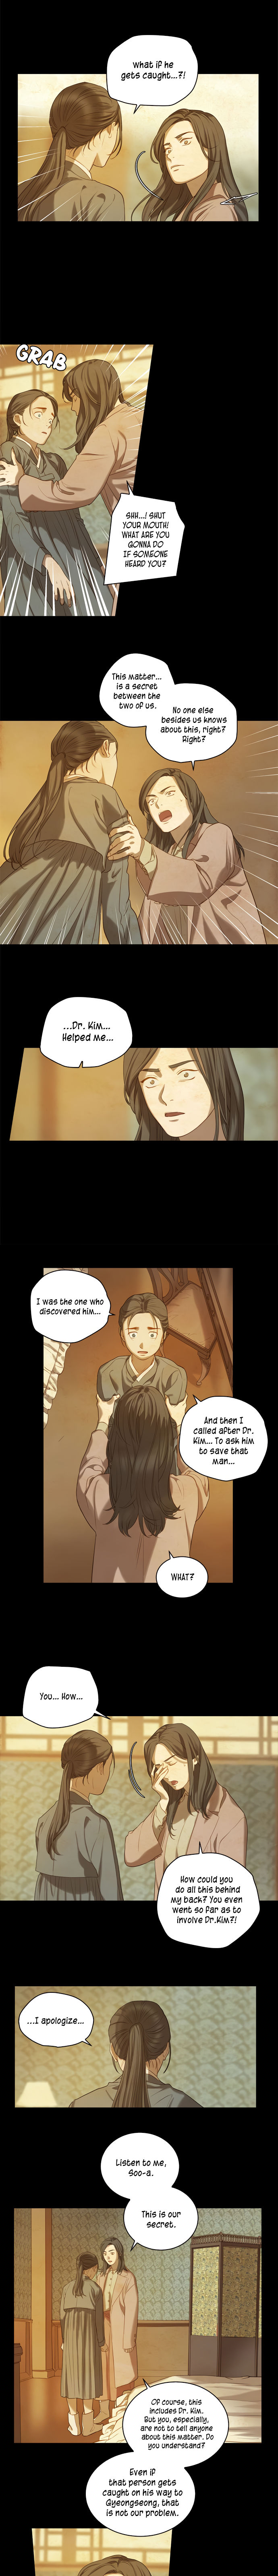 The Whale Star - The Gyeongseong Mermaid - Chapter 6 Page 5